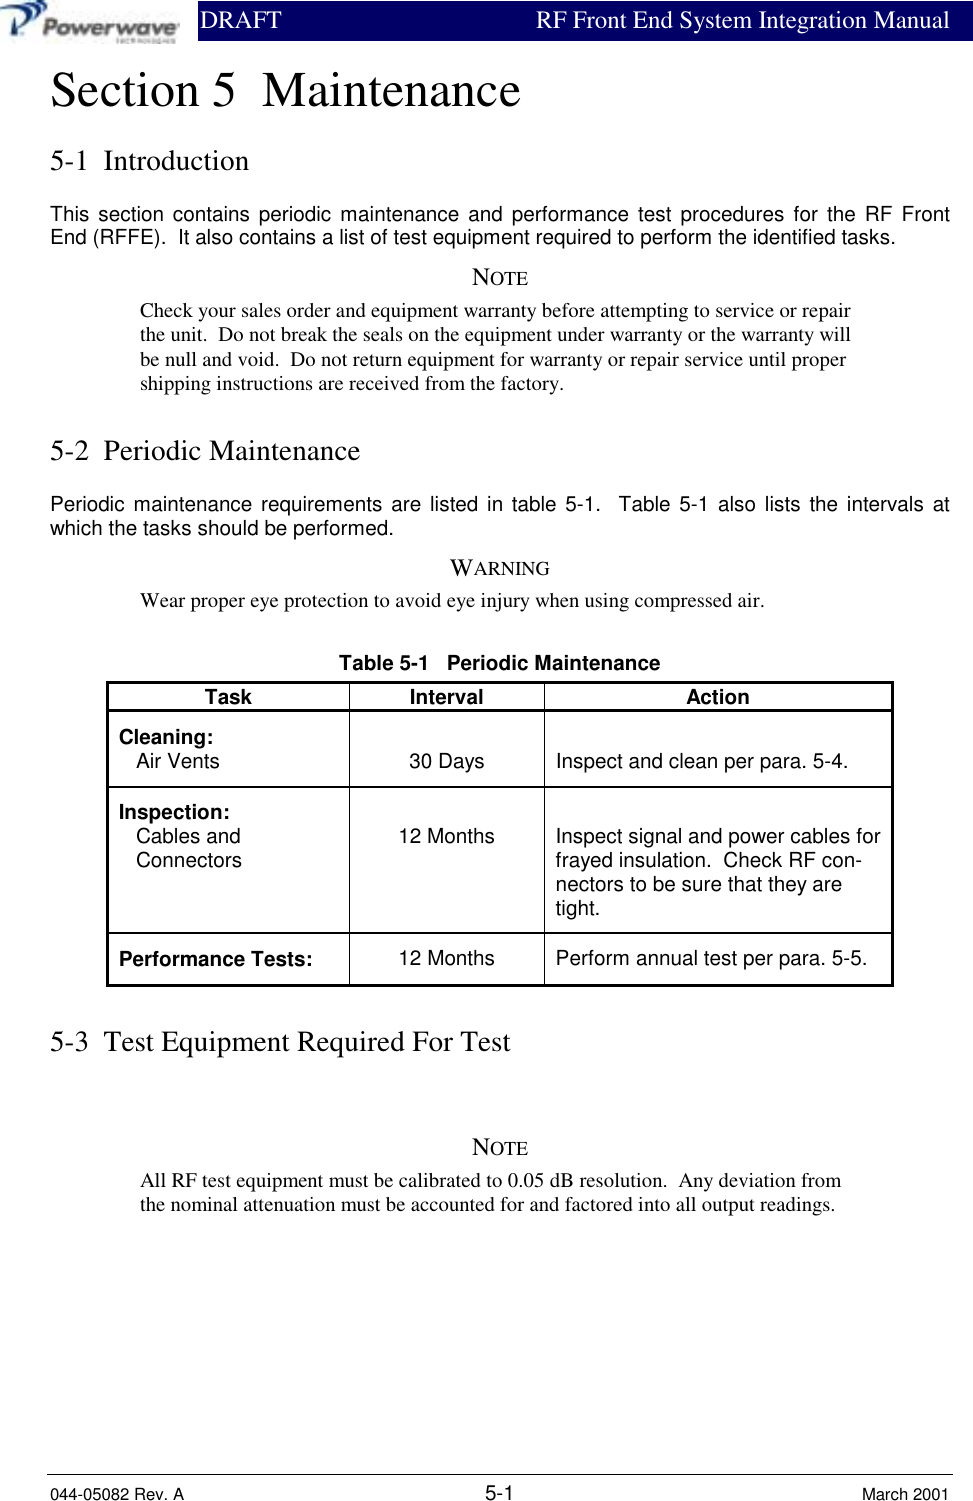                DRAFT RF Front End System Integration Manual044-05082 Rev. A 5-1 March 2001Section 5  Maintenance5-1  IntroductionThis section contains periodic maintenance and performance test procedures for the RF FrontEnd (RFFE).  It also contains a list of test equipment required to perform the identified tasks.NOTECheck your sales order and equipment warranty before attempting to service or repairthe unit.  Do not break the seals on the equipment under warranty or the warranty willbe null and void.  Do not return equipment for warranty or repair service until propershipping instructions are received from the factory.5-2  Periodic MaintenancePeriodic maintenance requirements are listed in table 5-1.  Table 5-1 also lists the intervals atwhich the tasks should be performed.WARNINGWear proper eye protection to avoid eye injury when using compressed air.Table 5-1   Periodic MaintenanceTask Interval ActionCleaning:   Air Vents 30 Days Inspect and clean per para. 5-4.Inspection:   Cables and   Connectors 12 Months Inspect signal and power cables forfrayed insulation.  Check RF con-nectors to be sure that they aretight.Performance Tests: 12 Months Perform annual test per para. 5-5.5-3  Test Equipment Required For TestNOTEAll RF test equipment must be calibrated to 0.05 dB resolution.  Any deviation fromthe nominal attenuation must be accounted for and factored into all output readings.